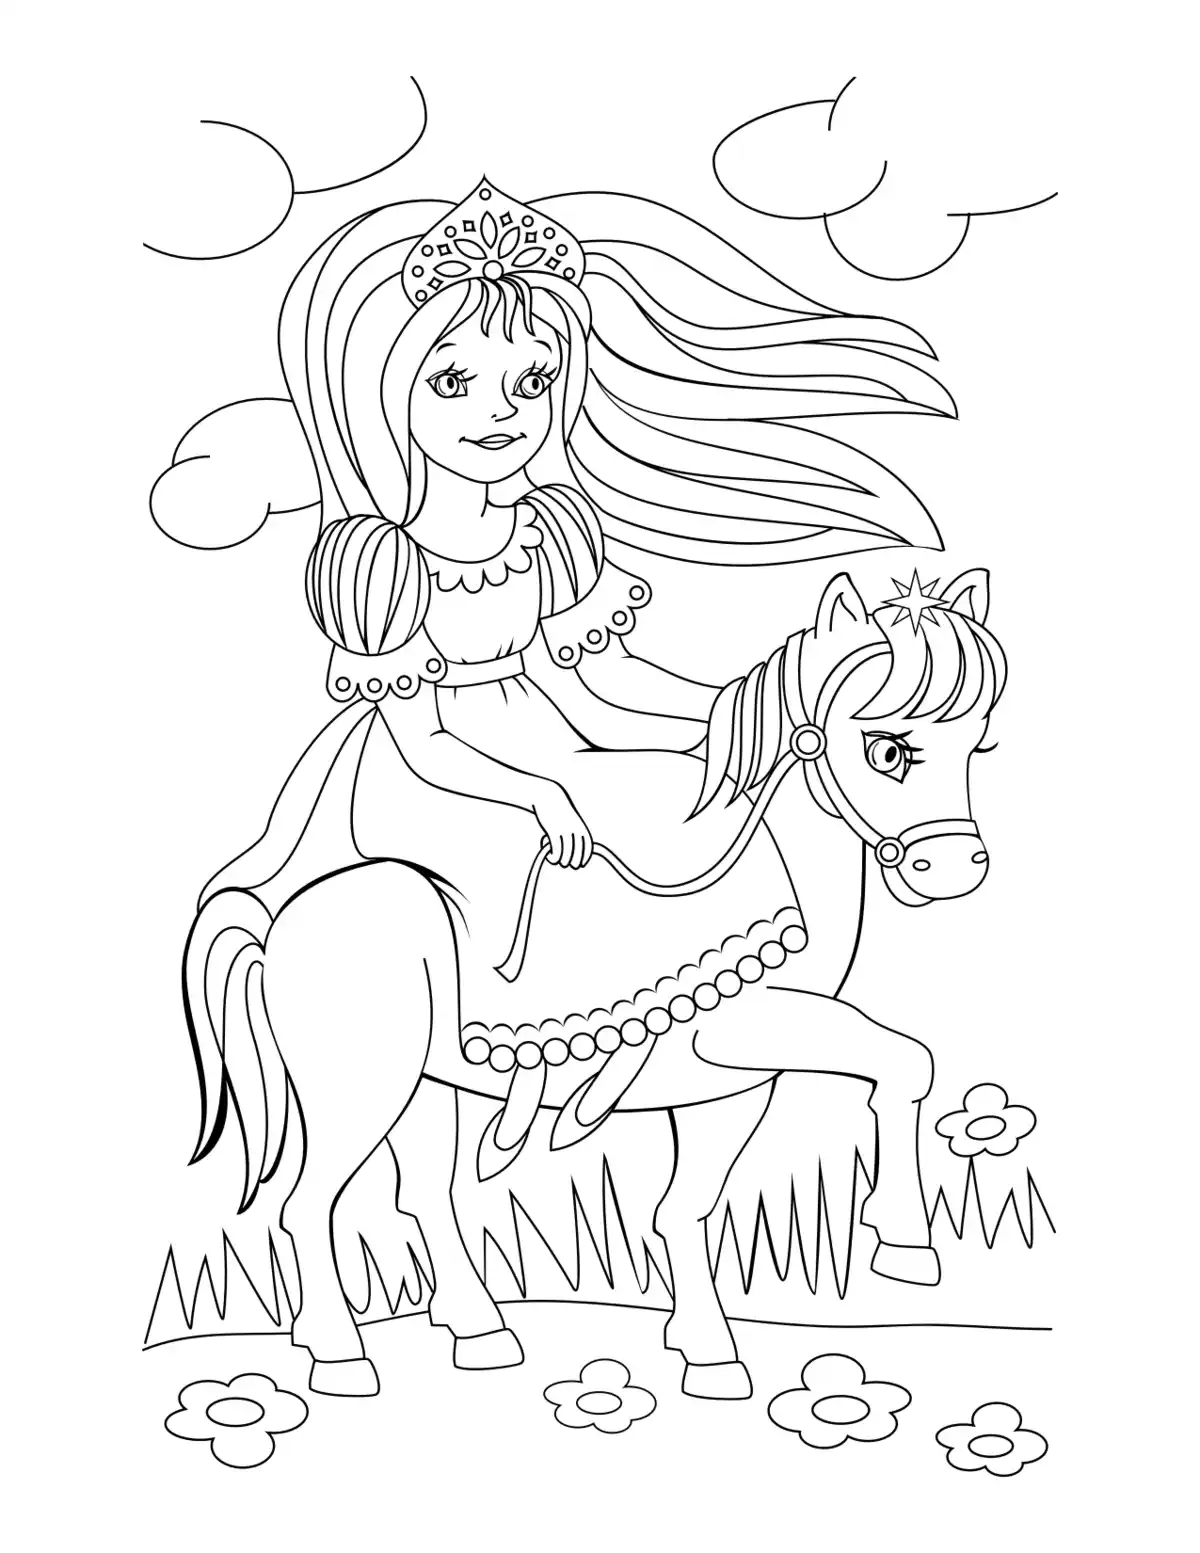 Free Coloring Pages PDF, Princess Riding Horse Flowers Coloring Pages Pdf